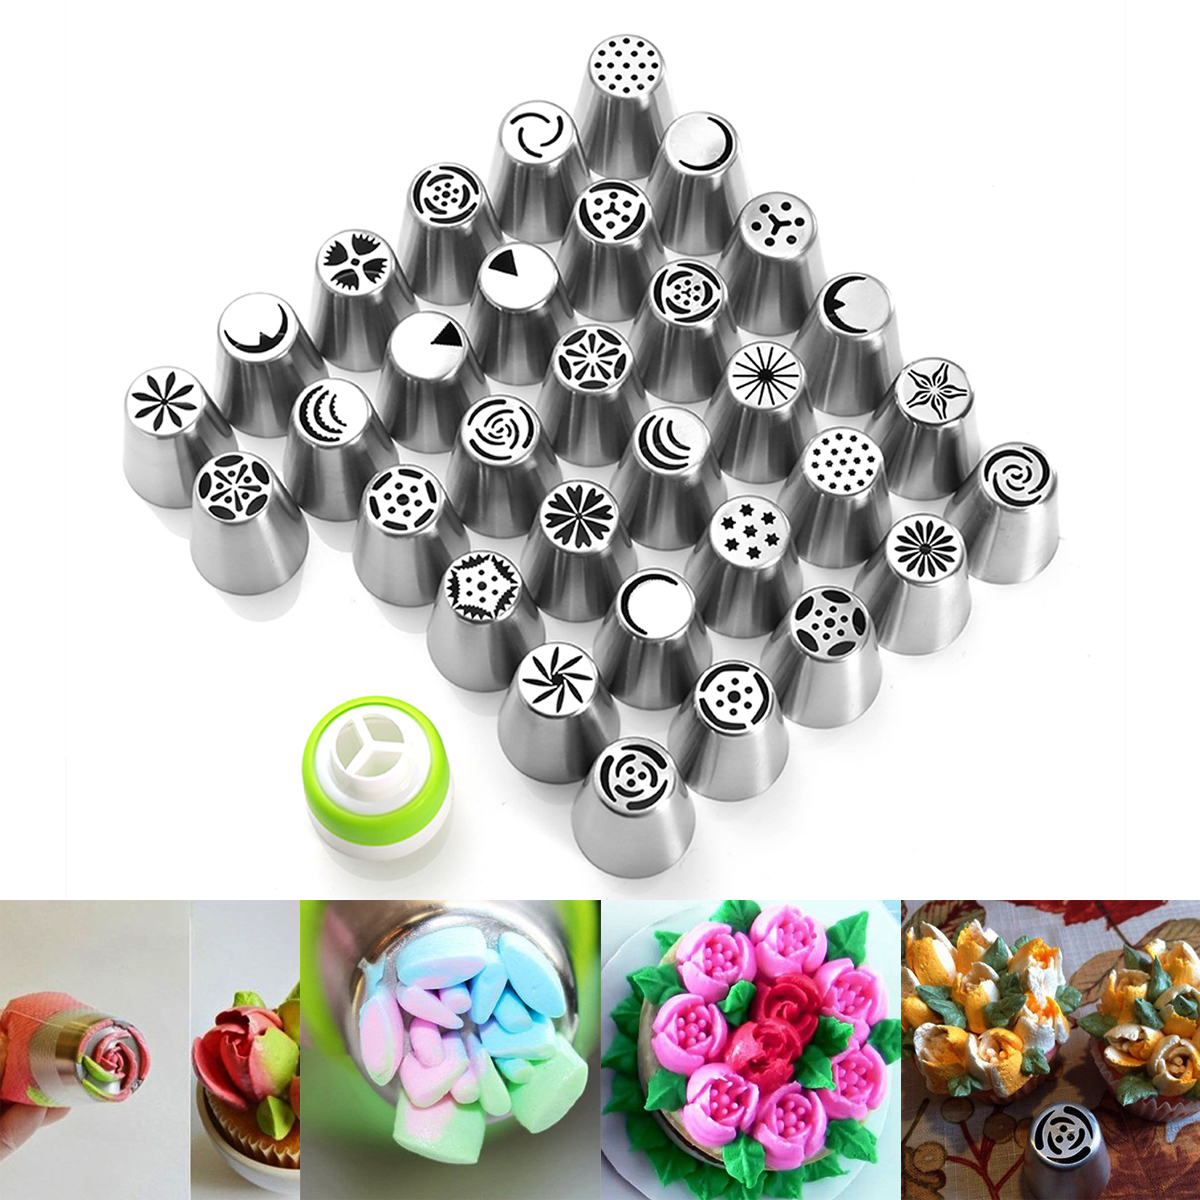 Stainless Steel Pastry Flower Cake Decoration Nozzles Tips Baking Tool